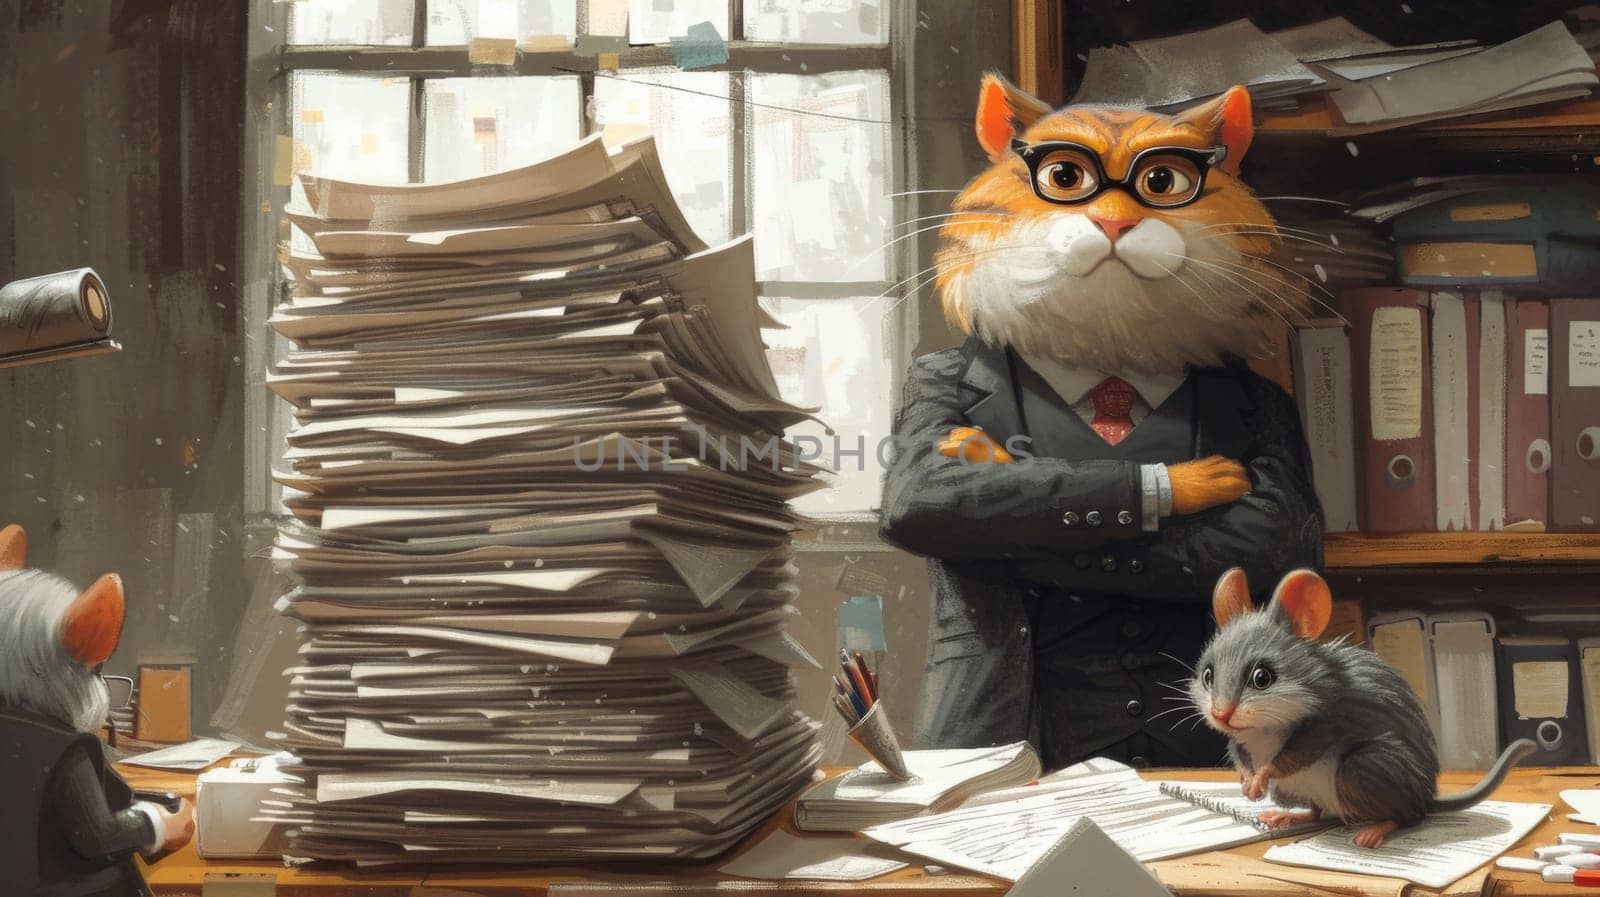 A cat and mouse standing in front of a pile of papers